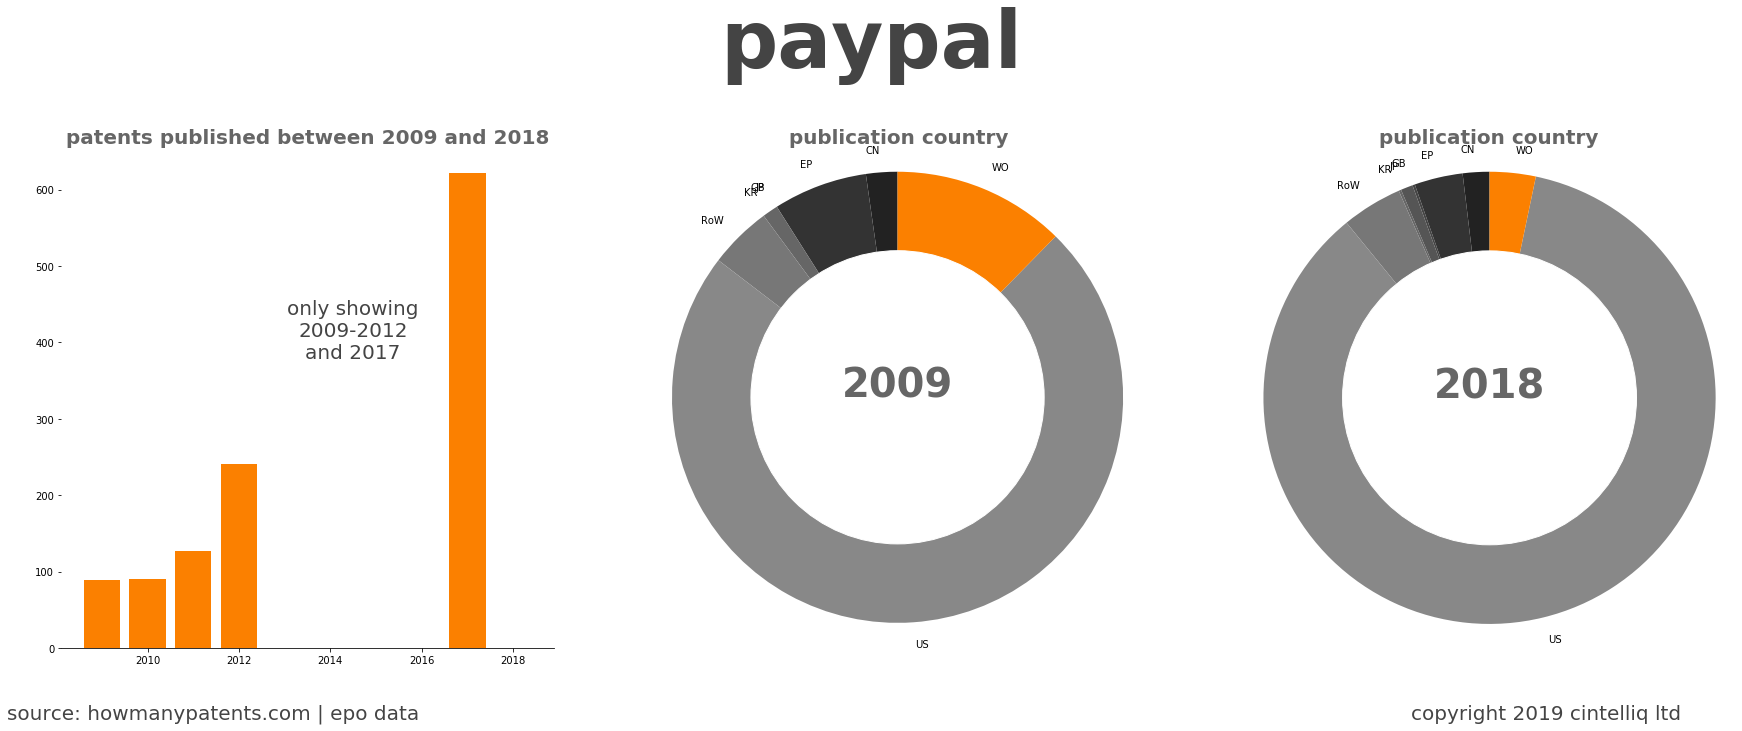 summary of patents for Paypal